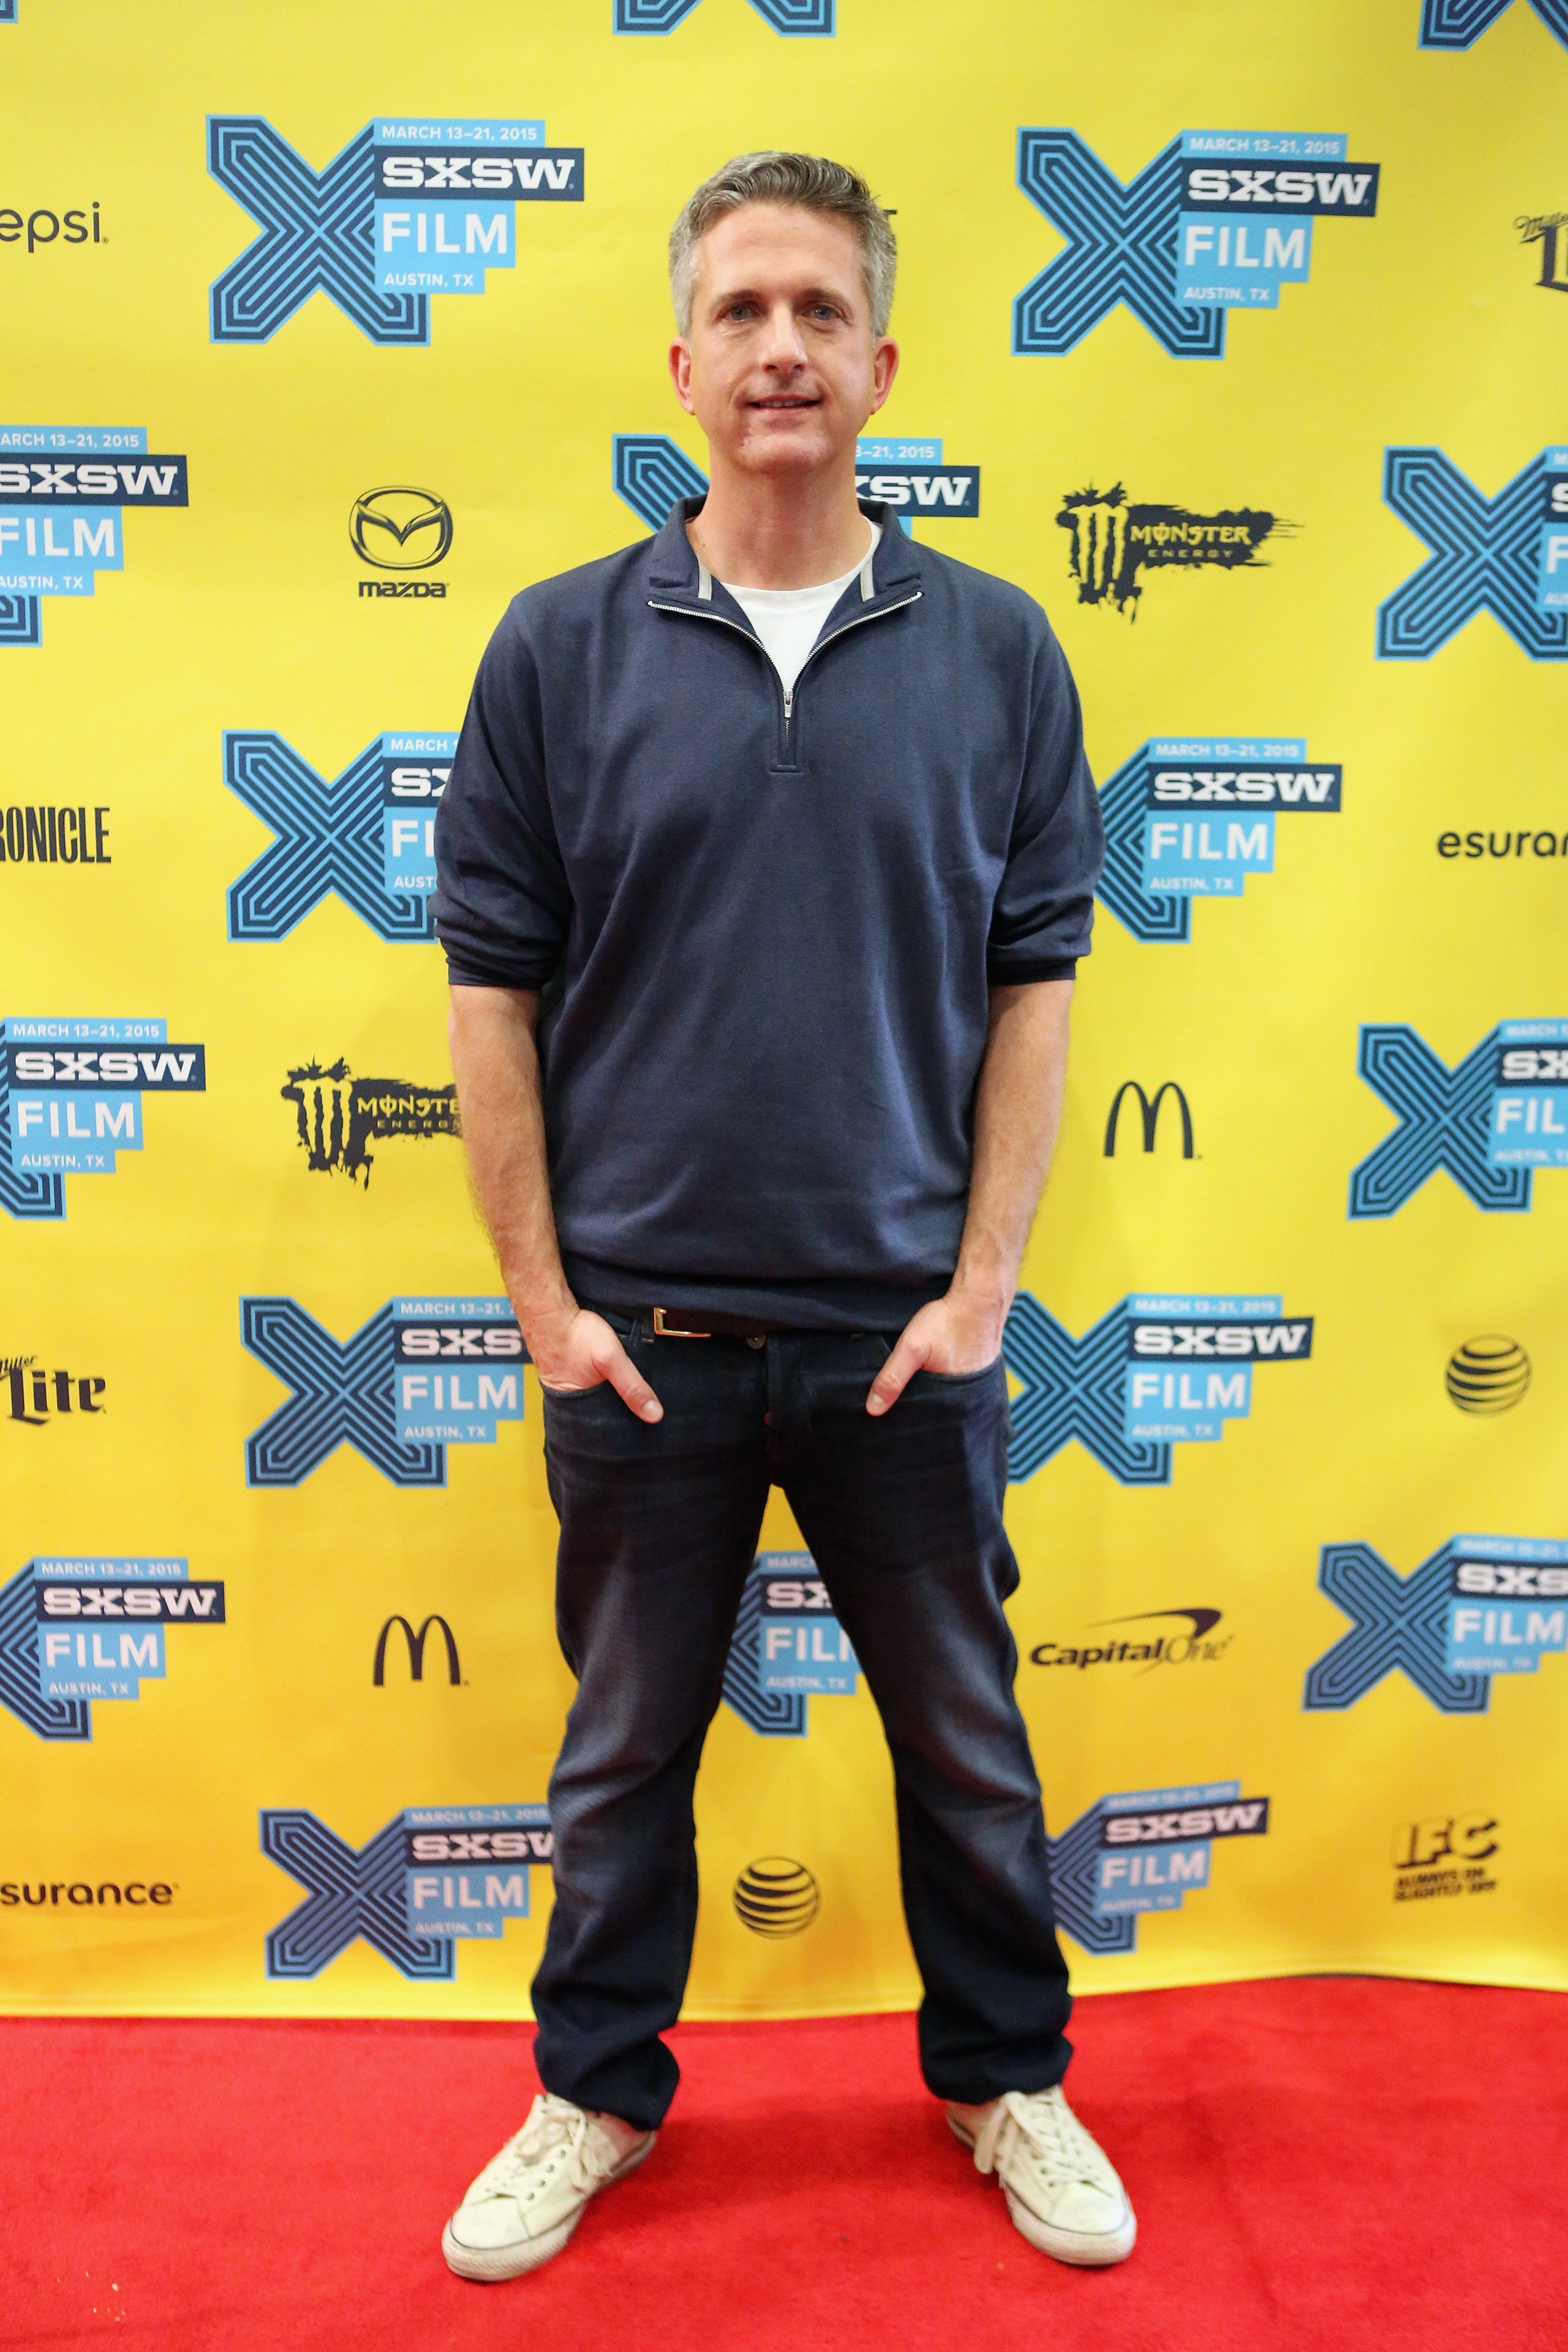 Bill Simmons attends the premiere of "Son of the Congo" during the 2015 SXSW Music, Film + Interactive Festival at Austin Convention Center in Austin on Mar. 14, 2015. (Heather Kennedy—Getty Images)